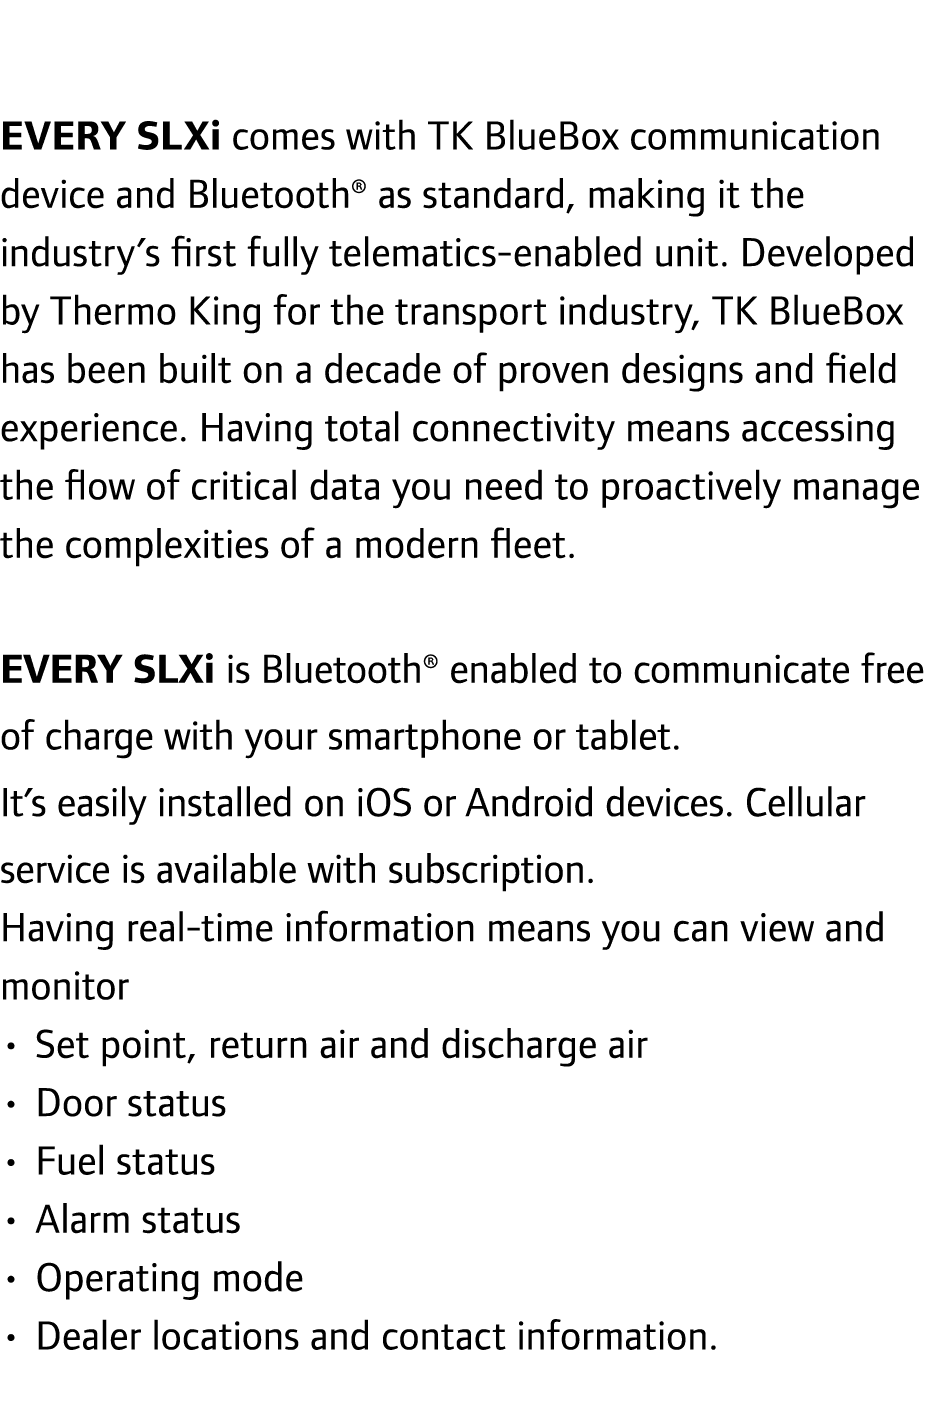 EVERY SLXi comes with TK BlueBox communication device and Bluetooth® as standard, making it the industry’s first full...